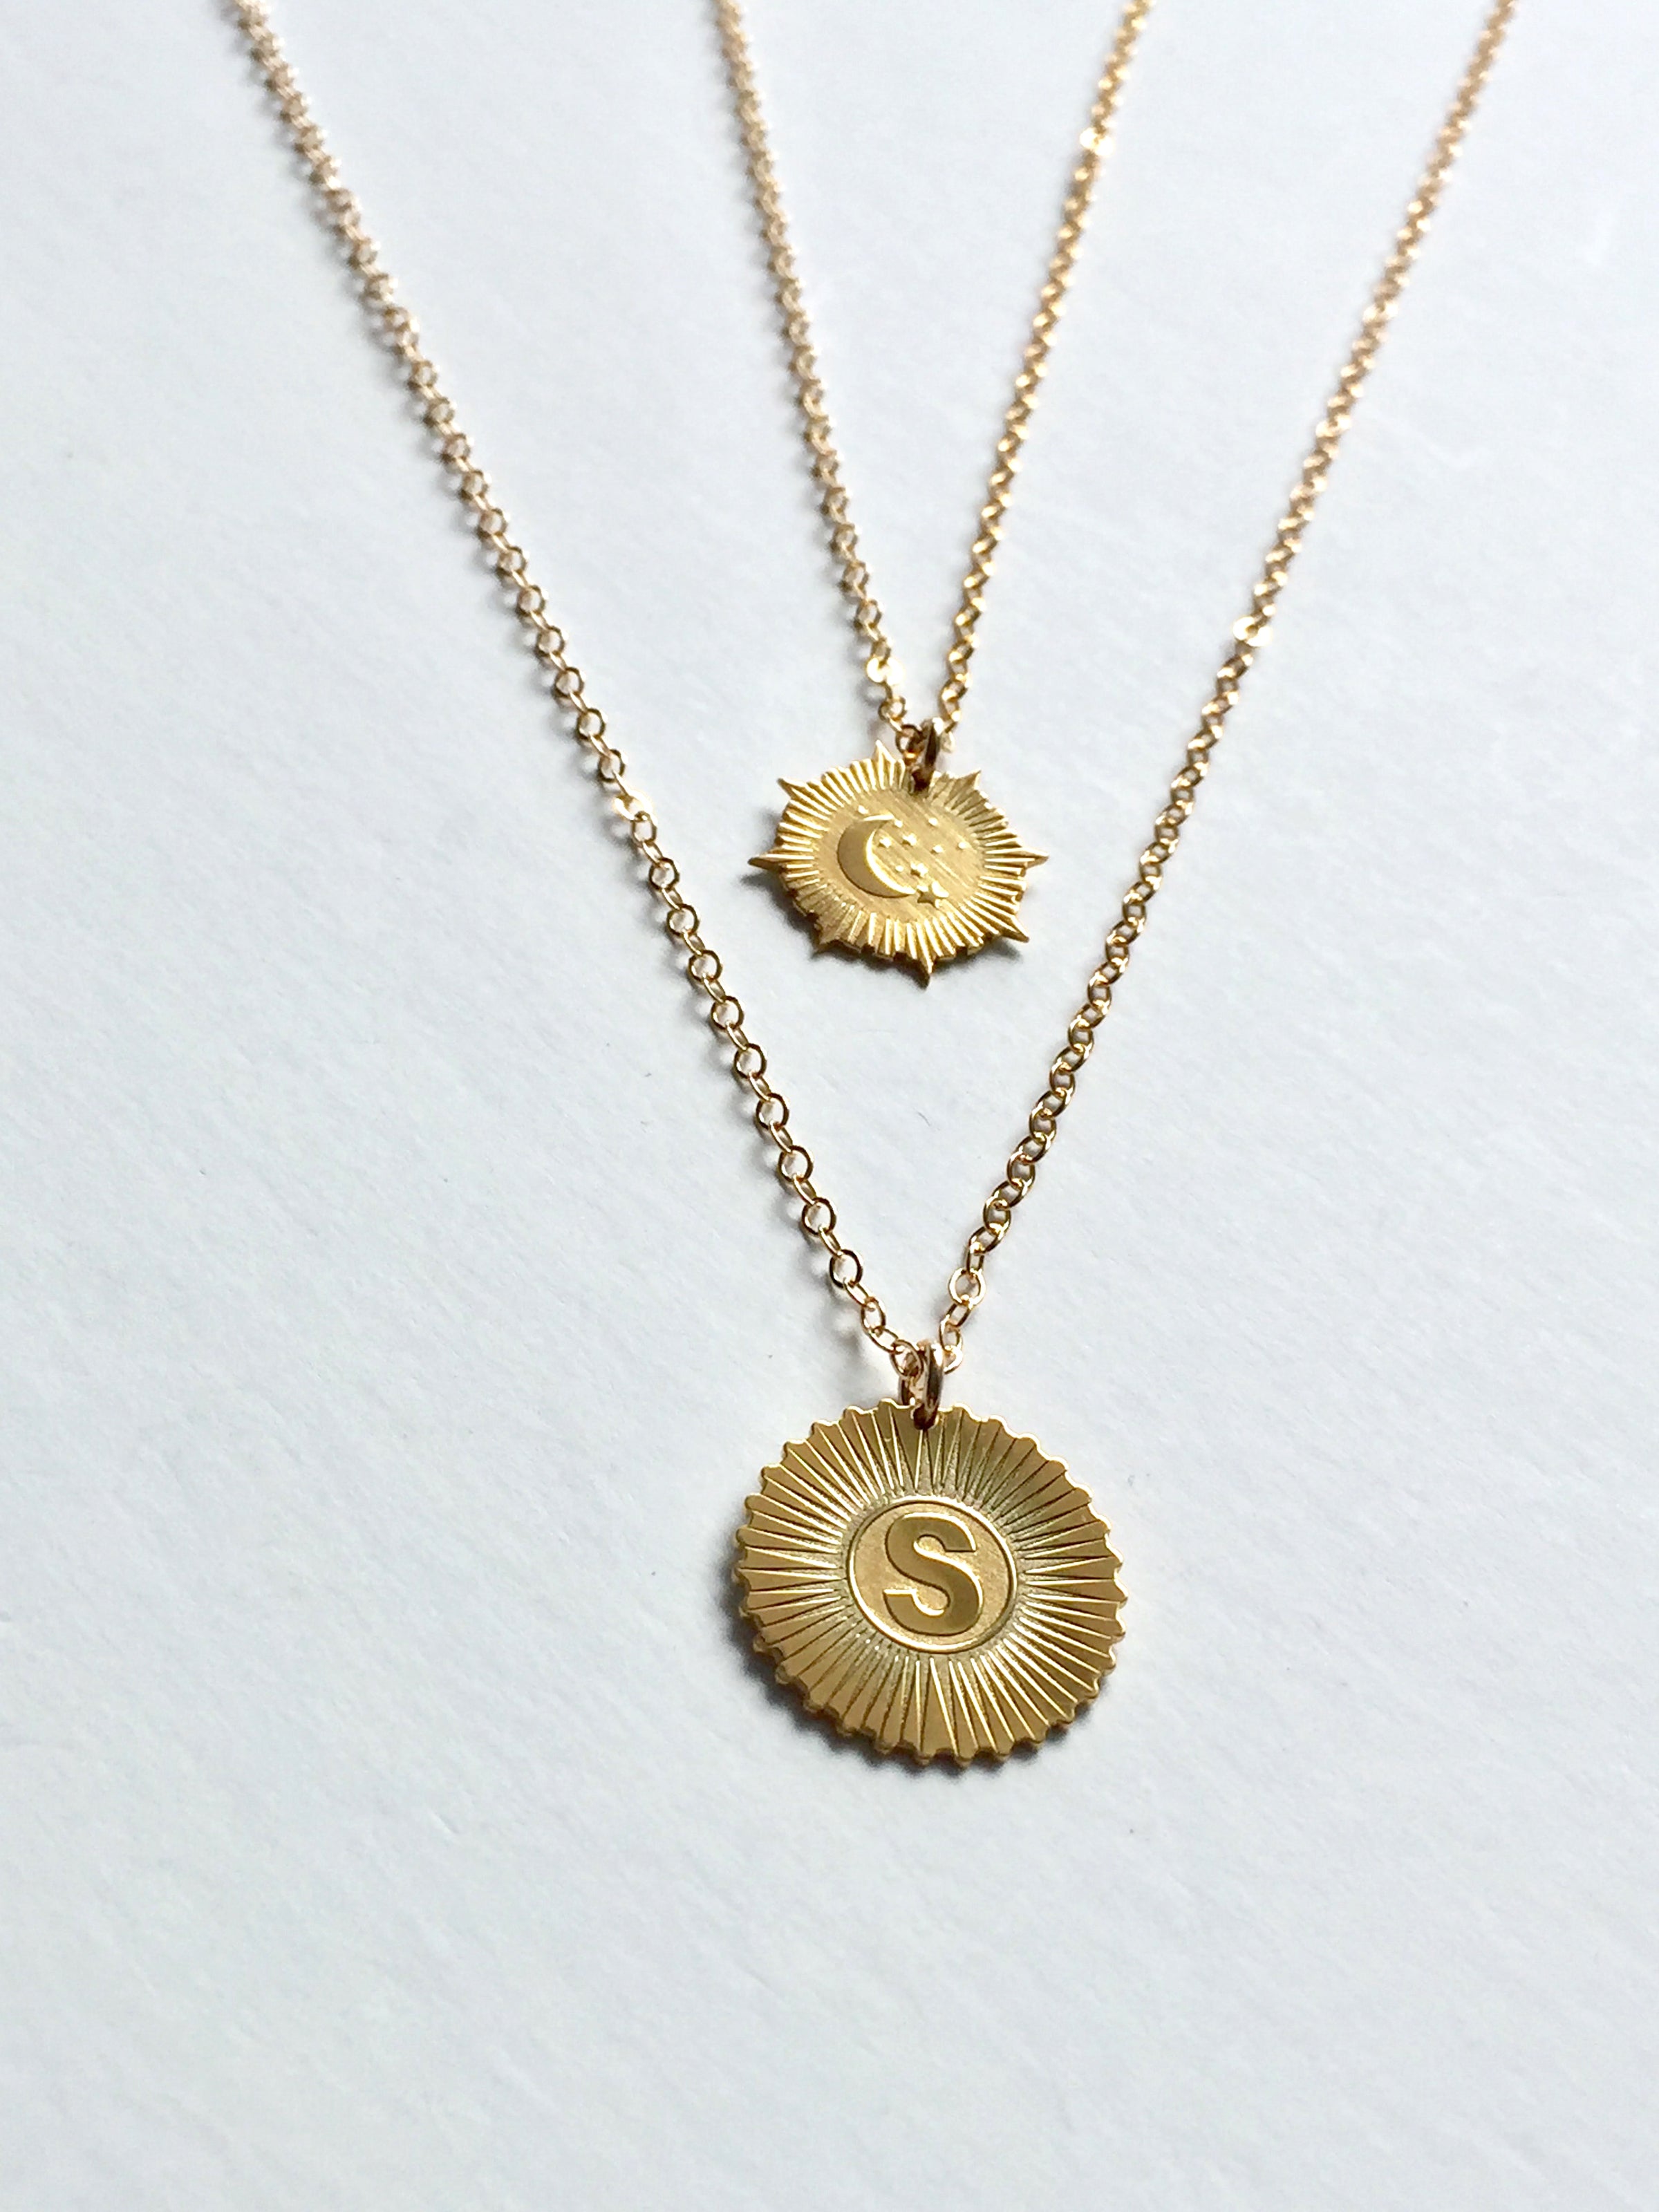 Custom Sun Pendant with Initial on Chain - Sterling Silver Necklace Gold